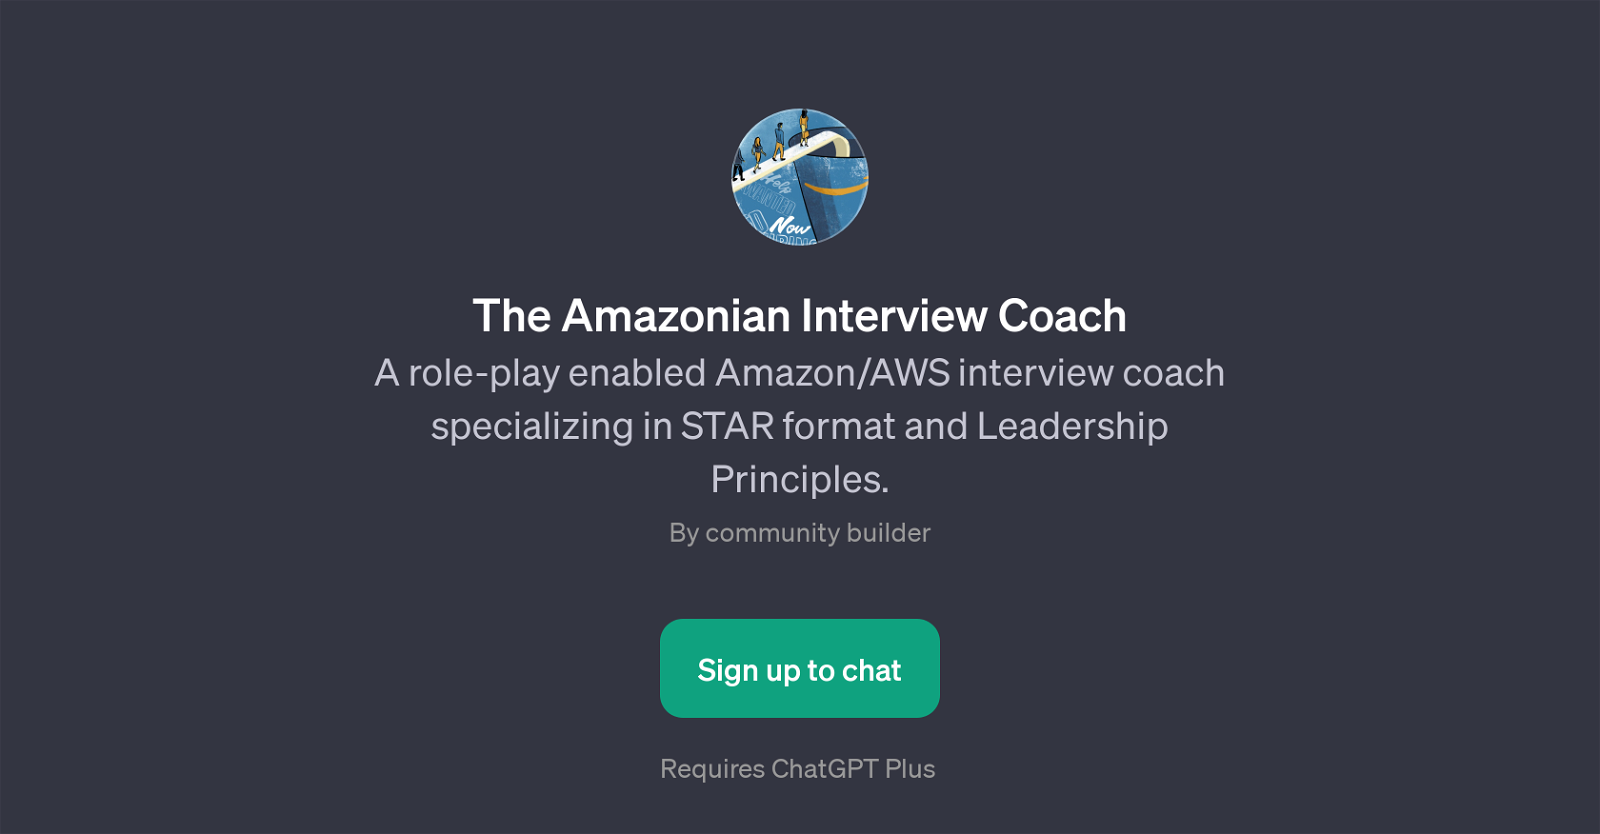 The Amazonian Interview Coach website